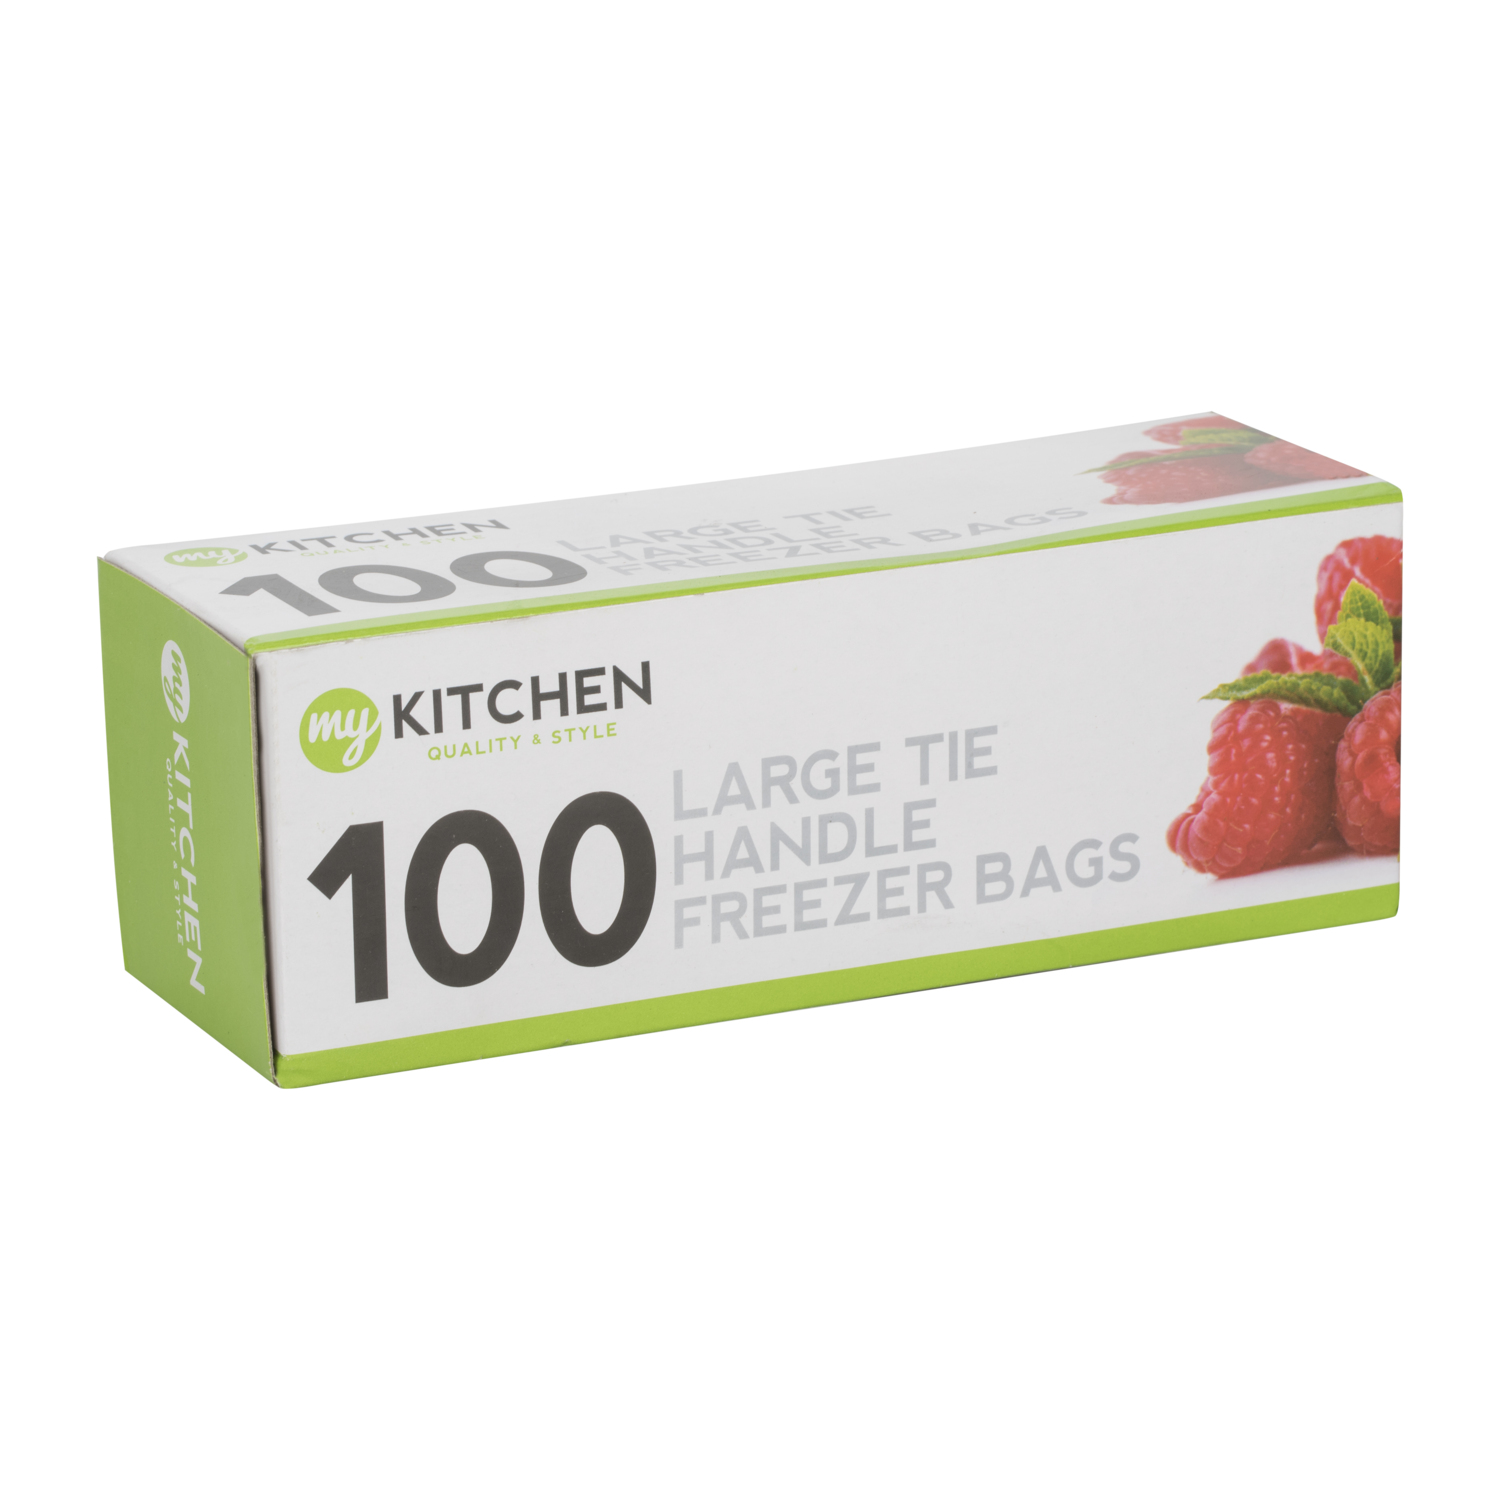 My Kitchen Large Freezer Bags with Tie Handles 100 Pack Image